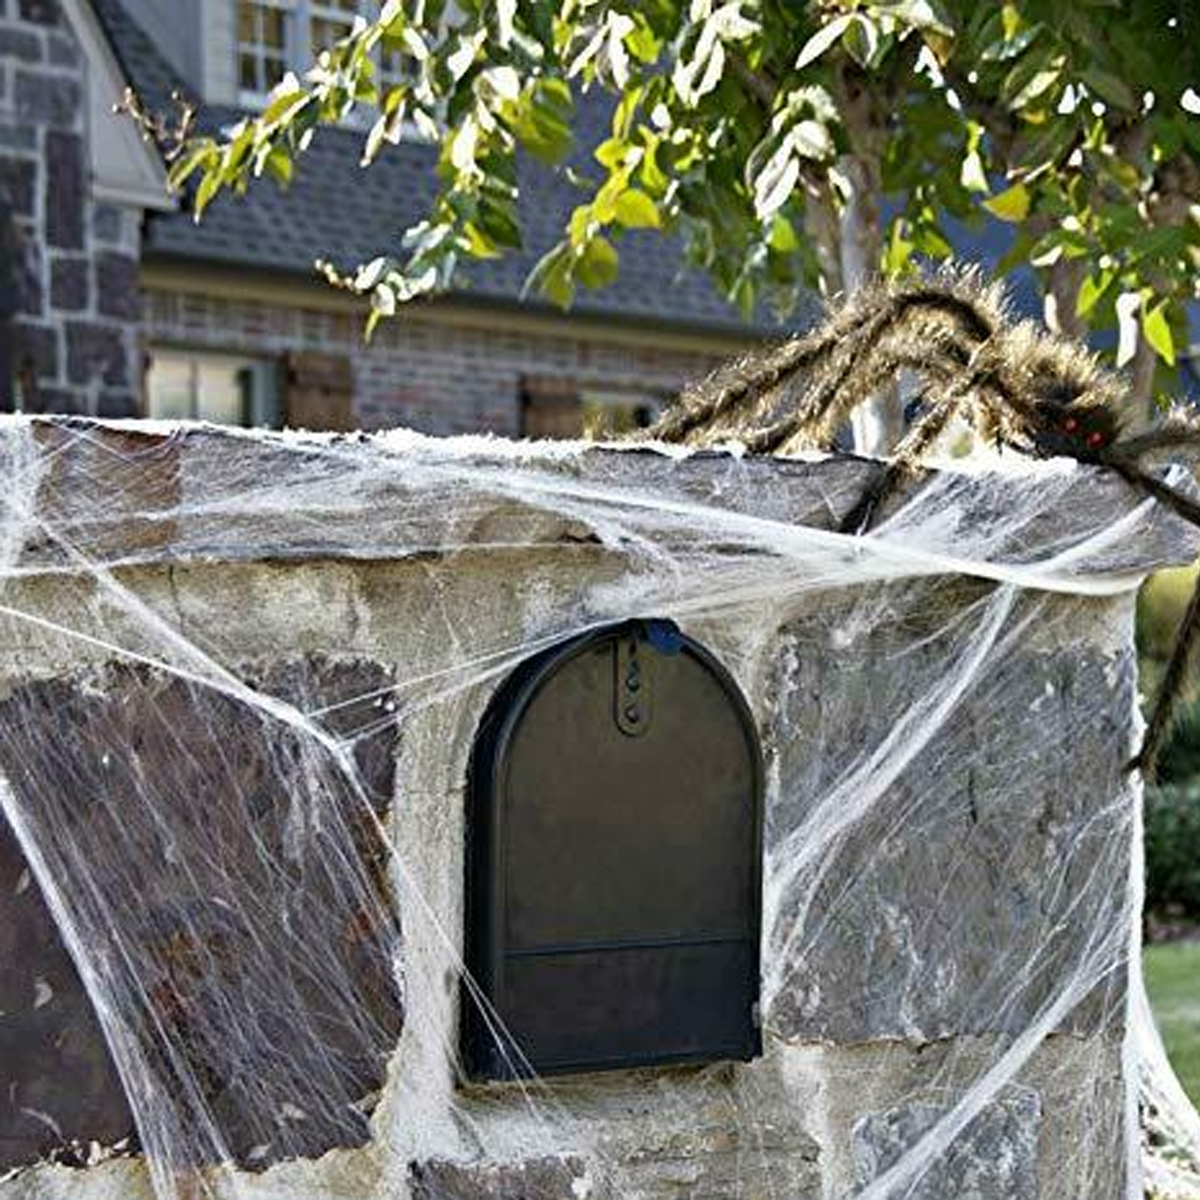 250g-Spider-Web-With-48Pcs-Small-Spiders-Halloween-Outdoor-Party-Decorations-Props-Supplies-1730880-7